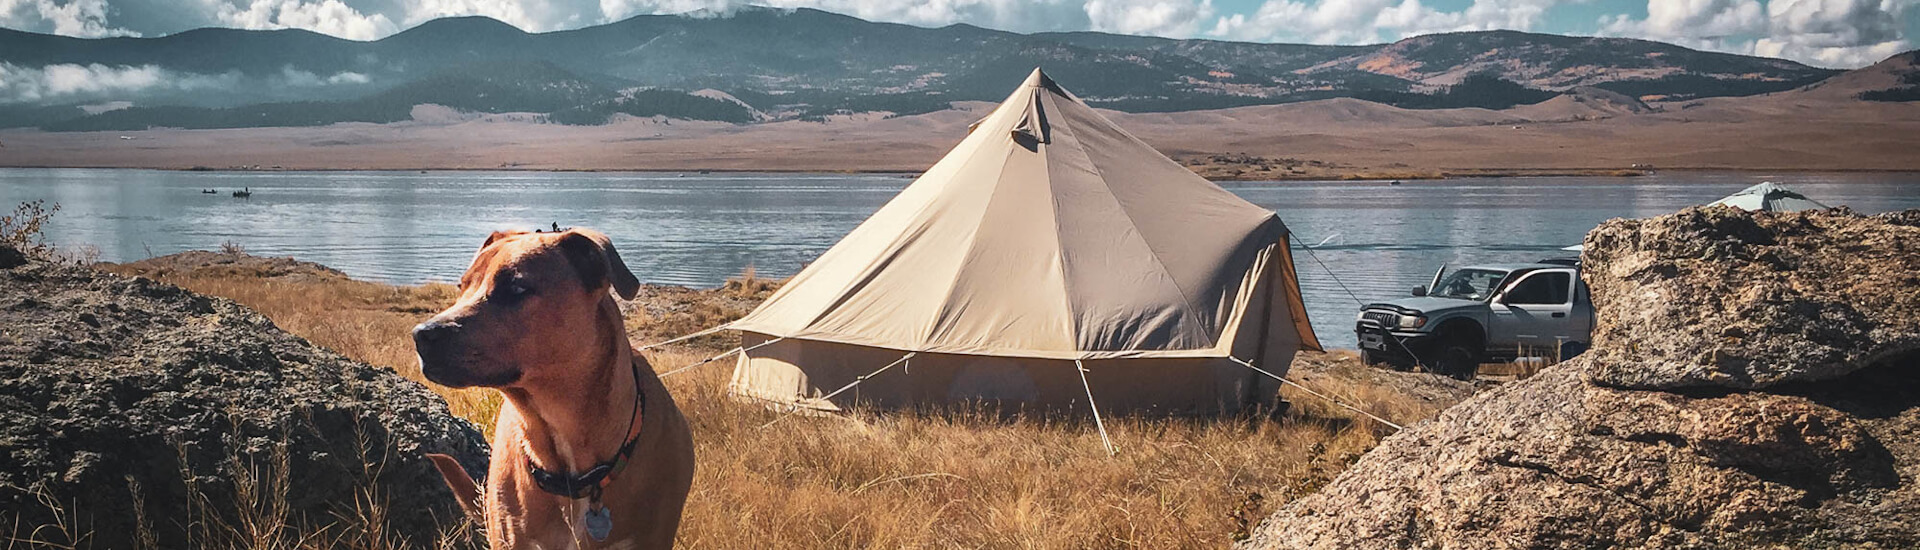 Discover the Original Sibley Bell Tent